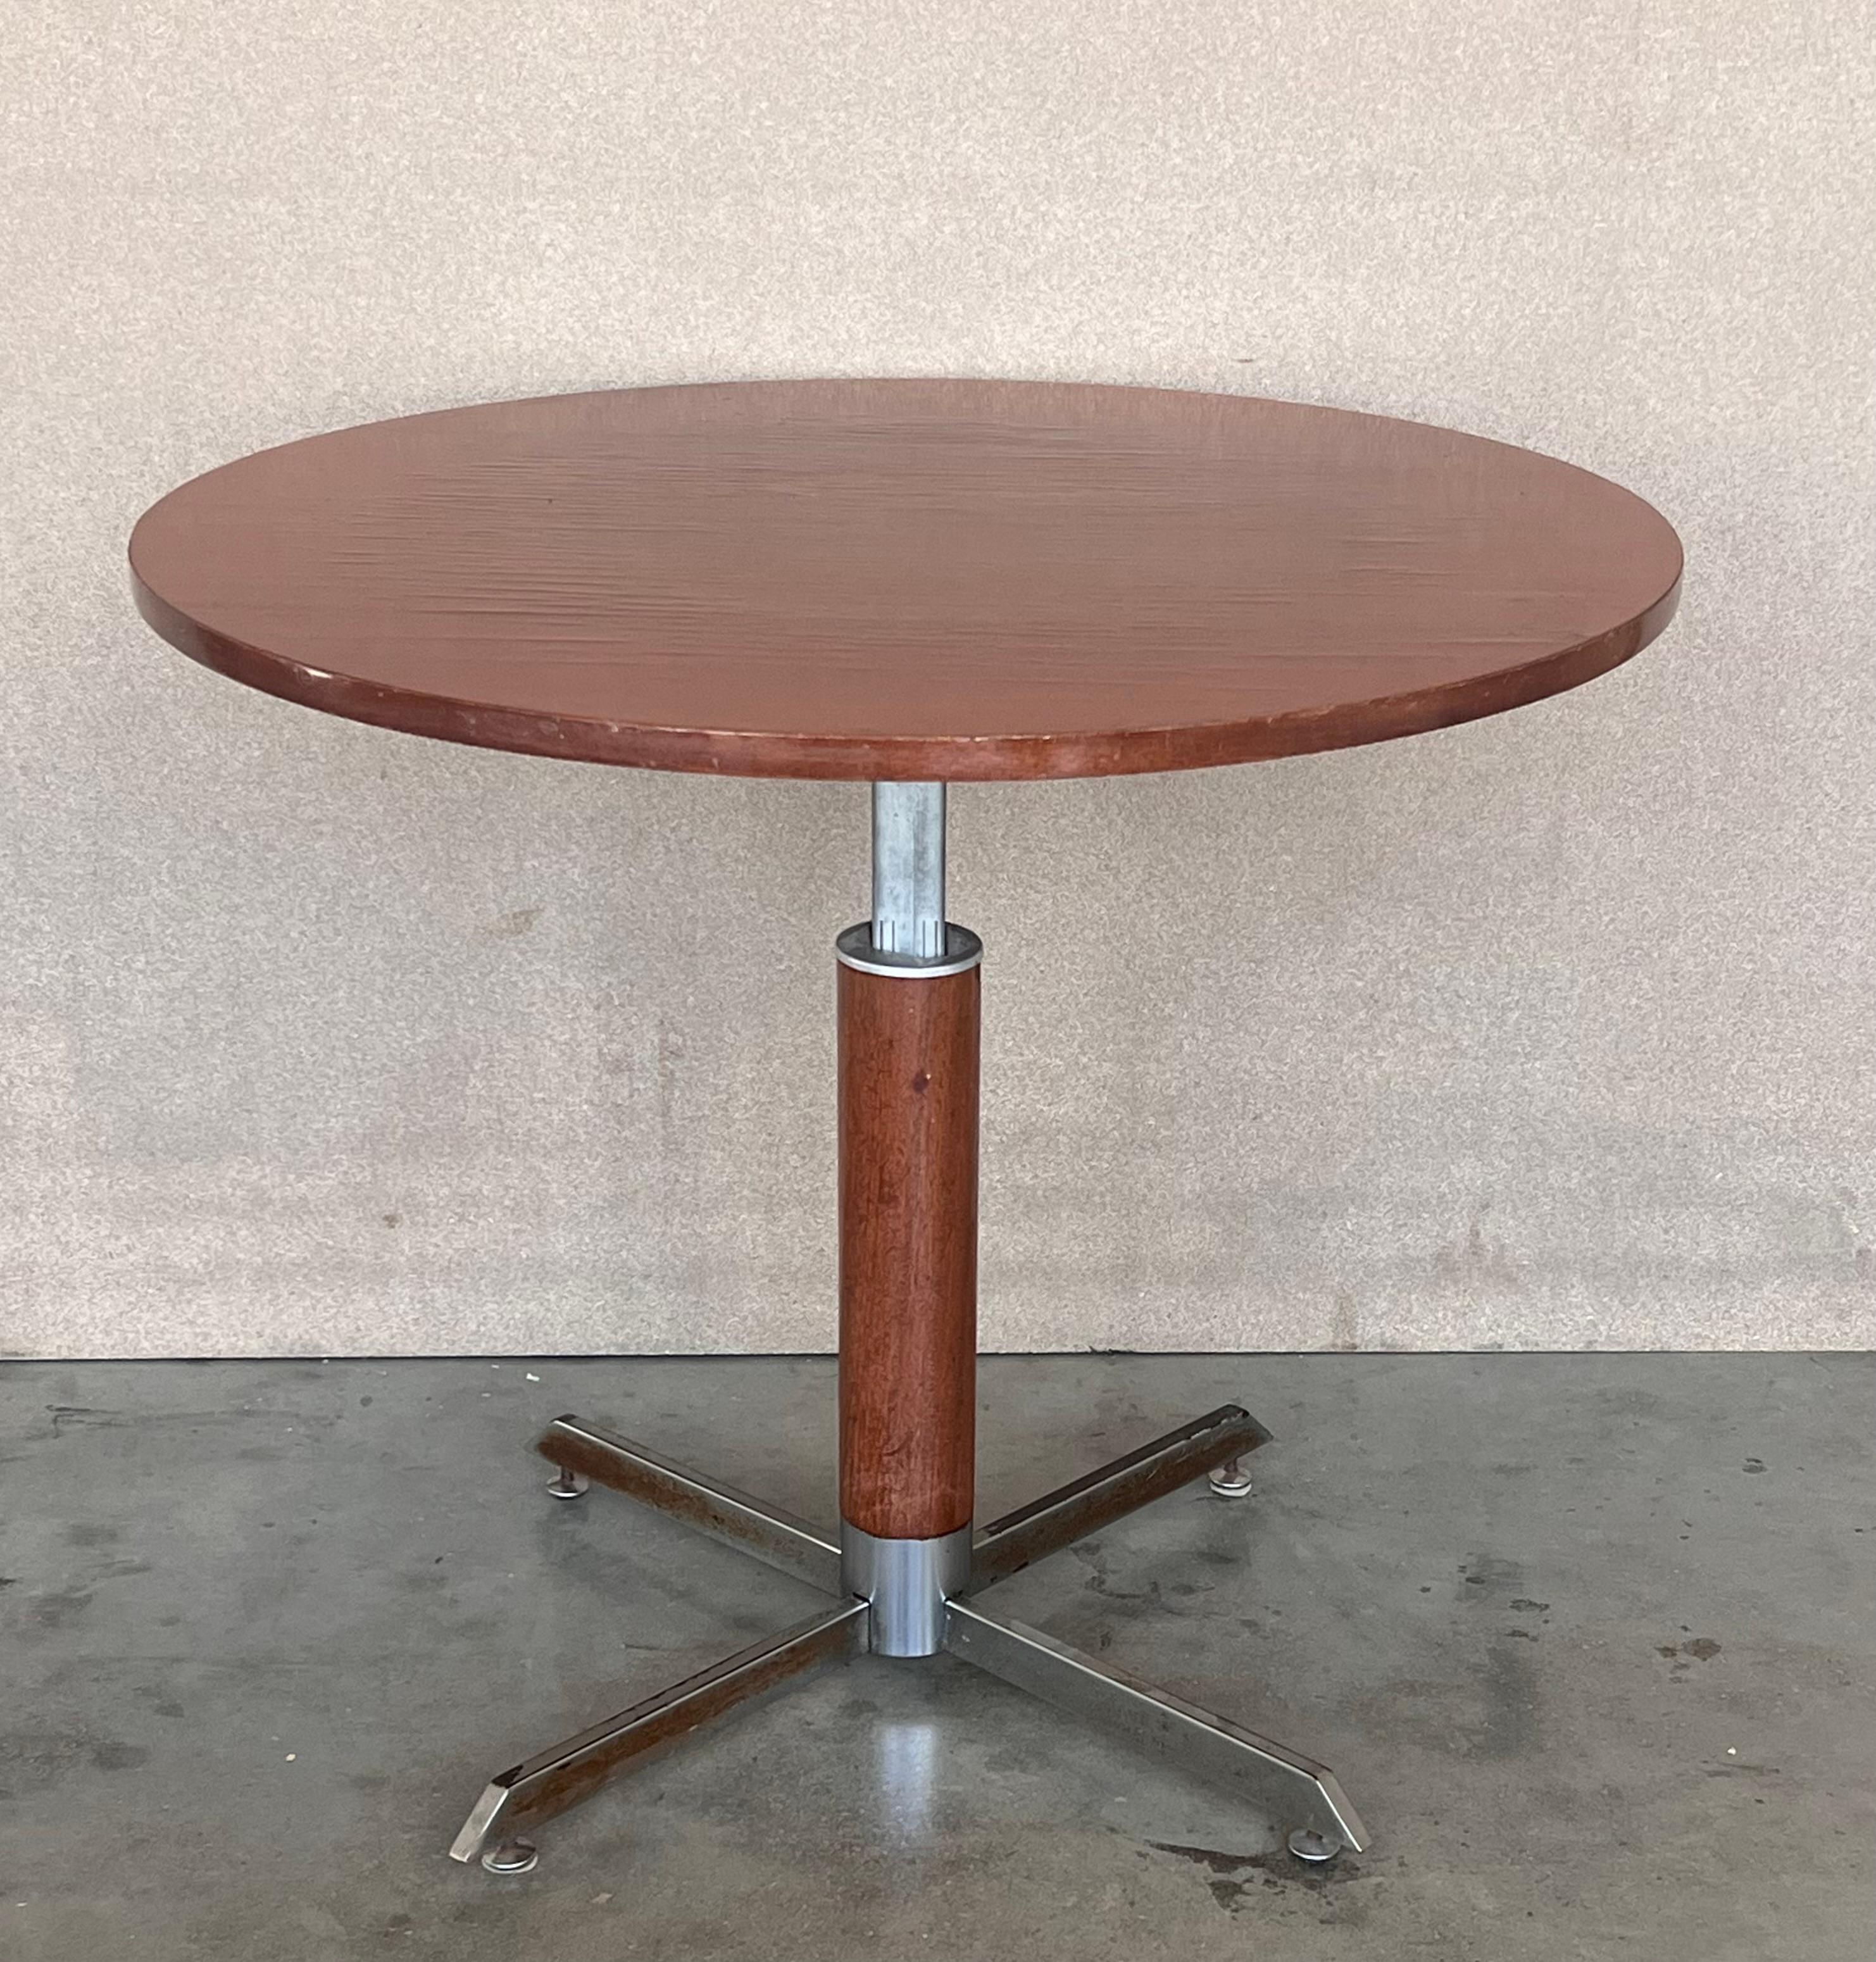 A fine French Art Deco two-tiered mahogany gueridon table supported by three tubular chromed .


Elevable Height: between 26.96in a 24.40in